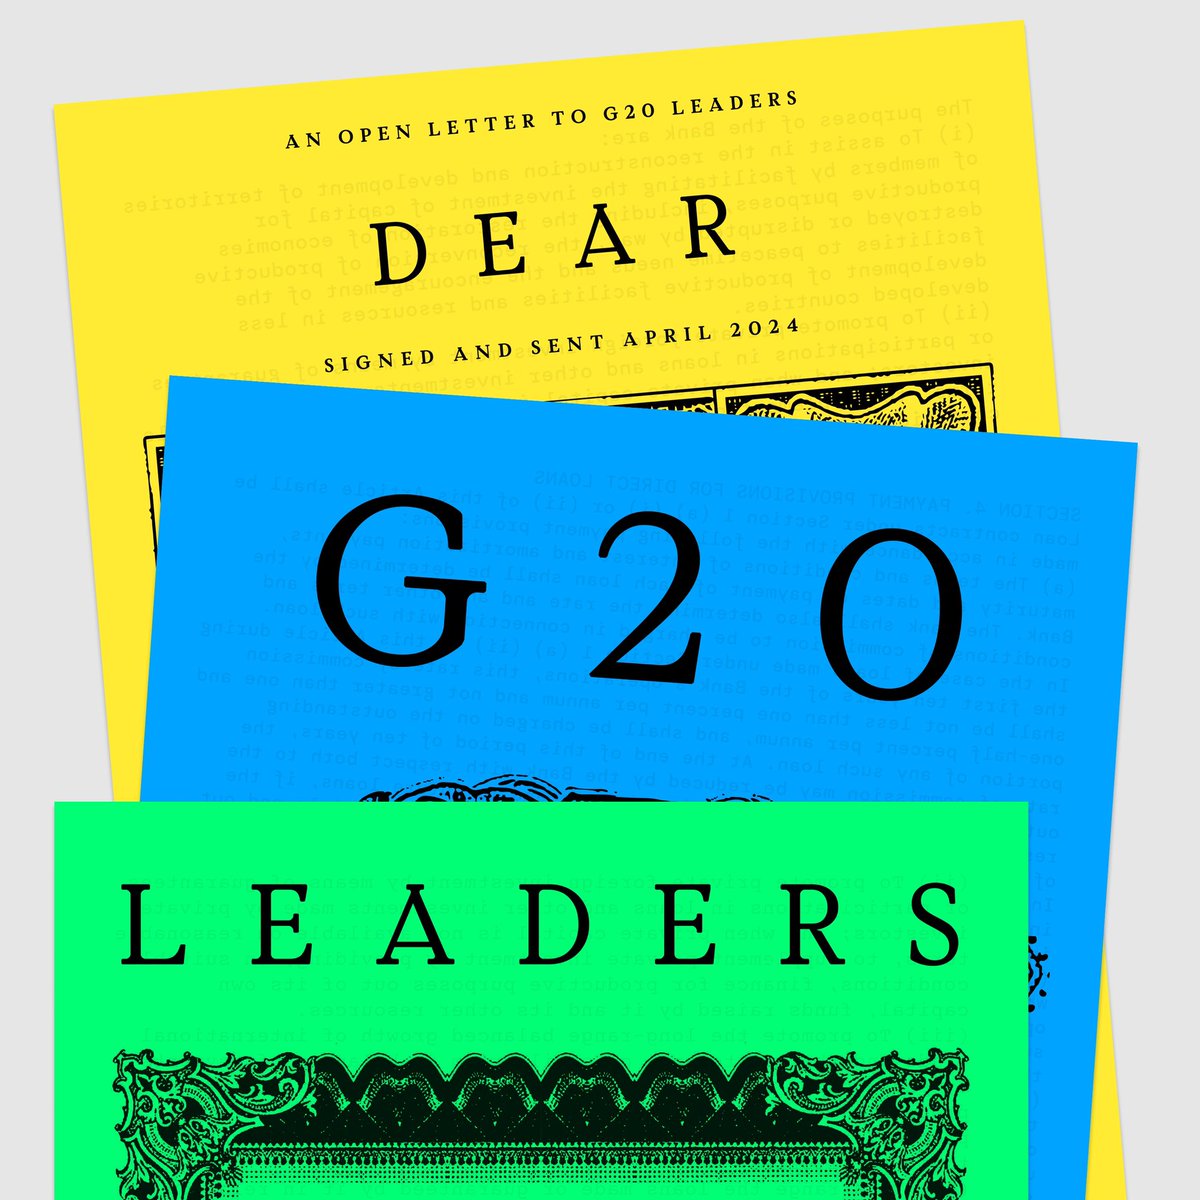 The global financial system needs an upgrade.

Read the #DearG20 open letter, signed by over 100 former leaders, activists, academics and artists calling on #G20 Leaders to: Triple the Investment. End crippling debt. Make polluters pay.

Read the letter: globalgoals.org/dearG20